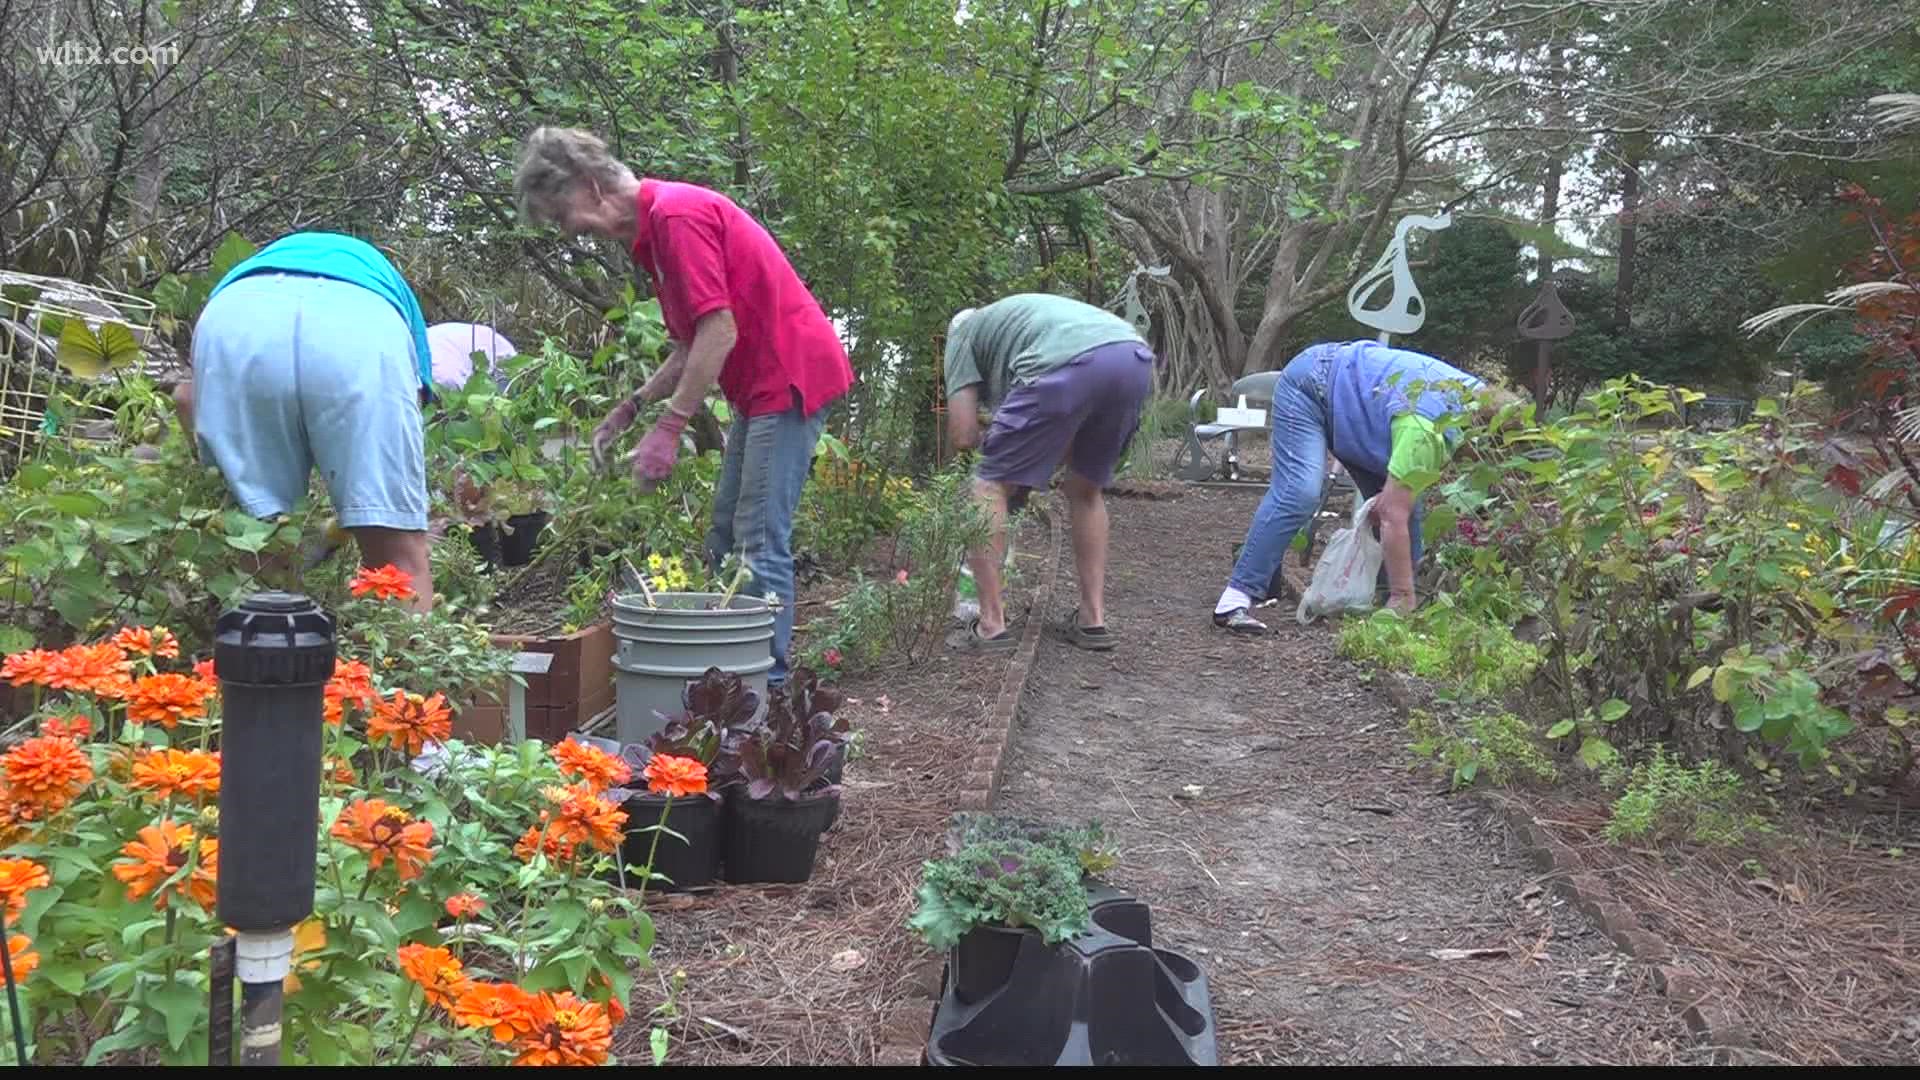 The Sumter Master Gardeners Association is doing at the Chocolate Garden at the Sumter Iris Garden.